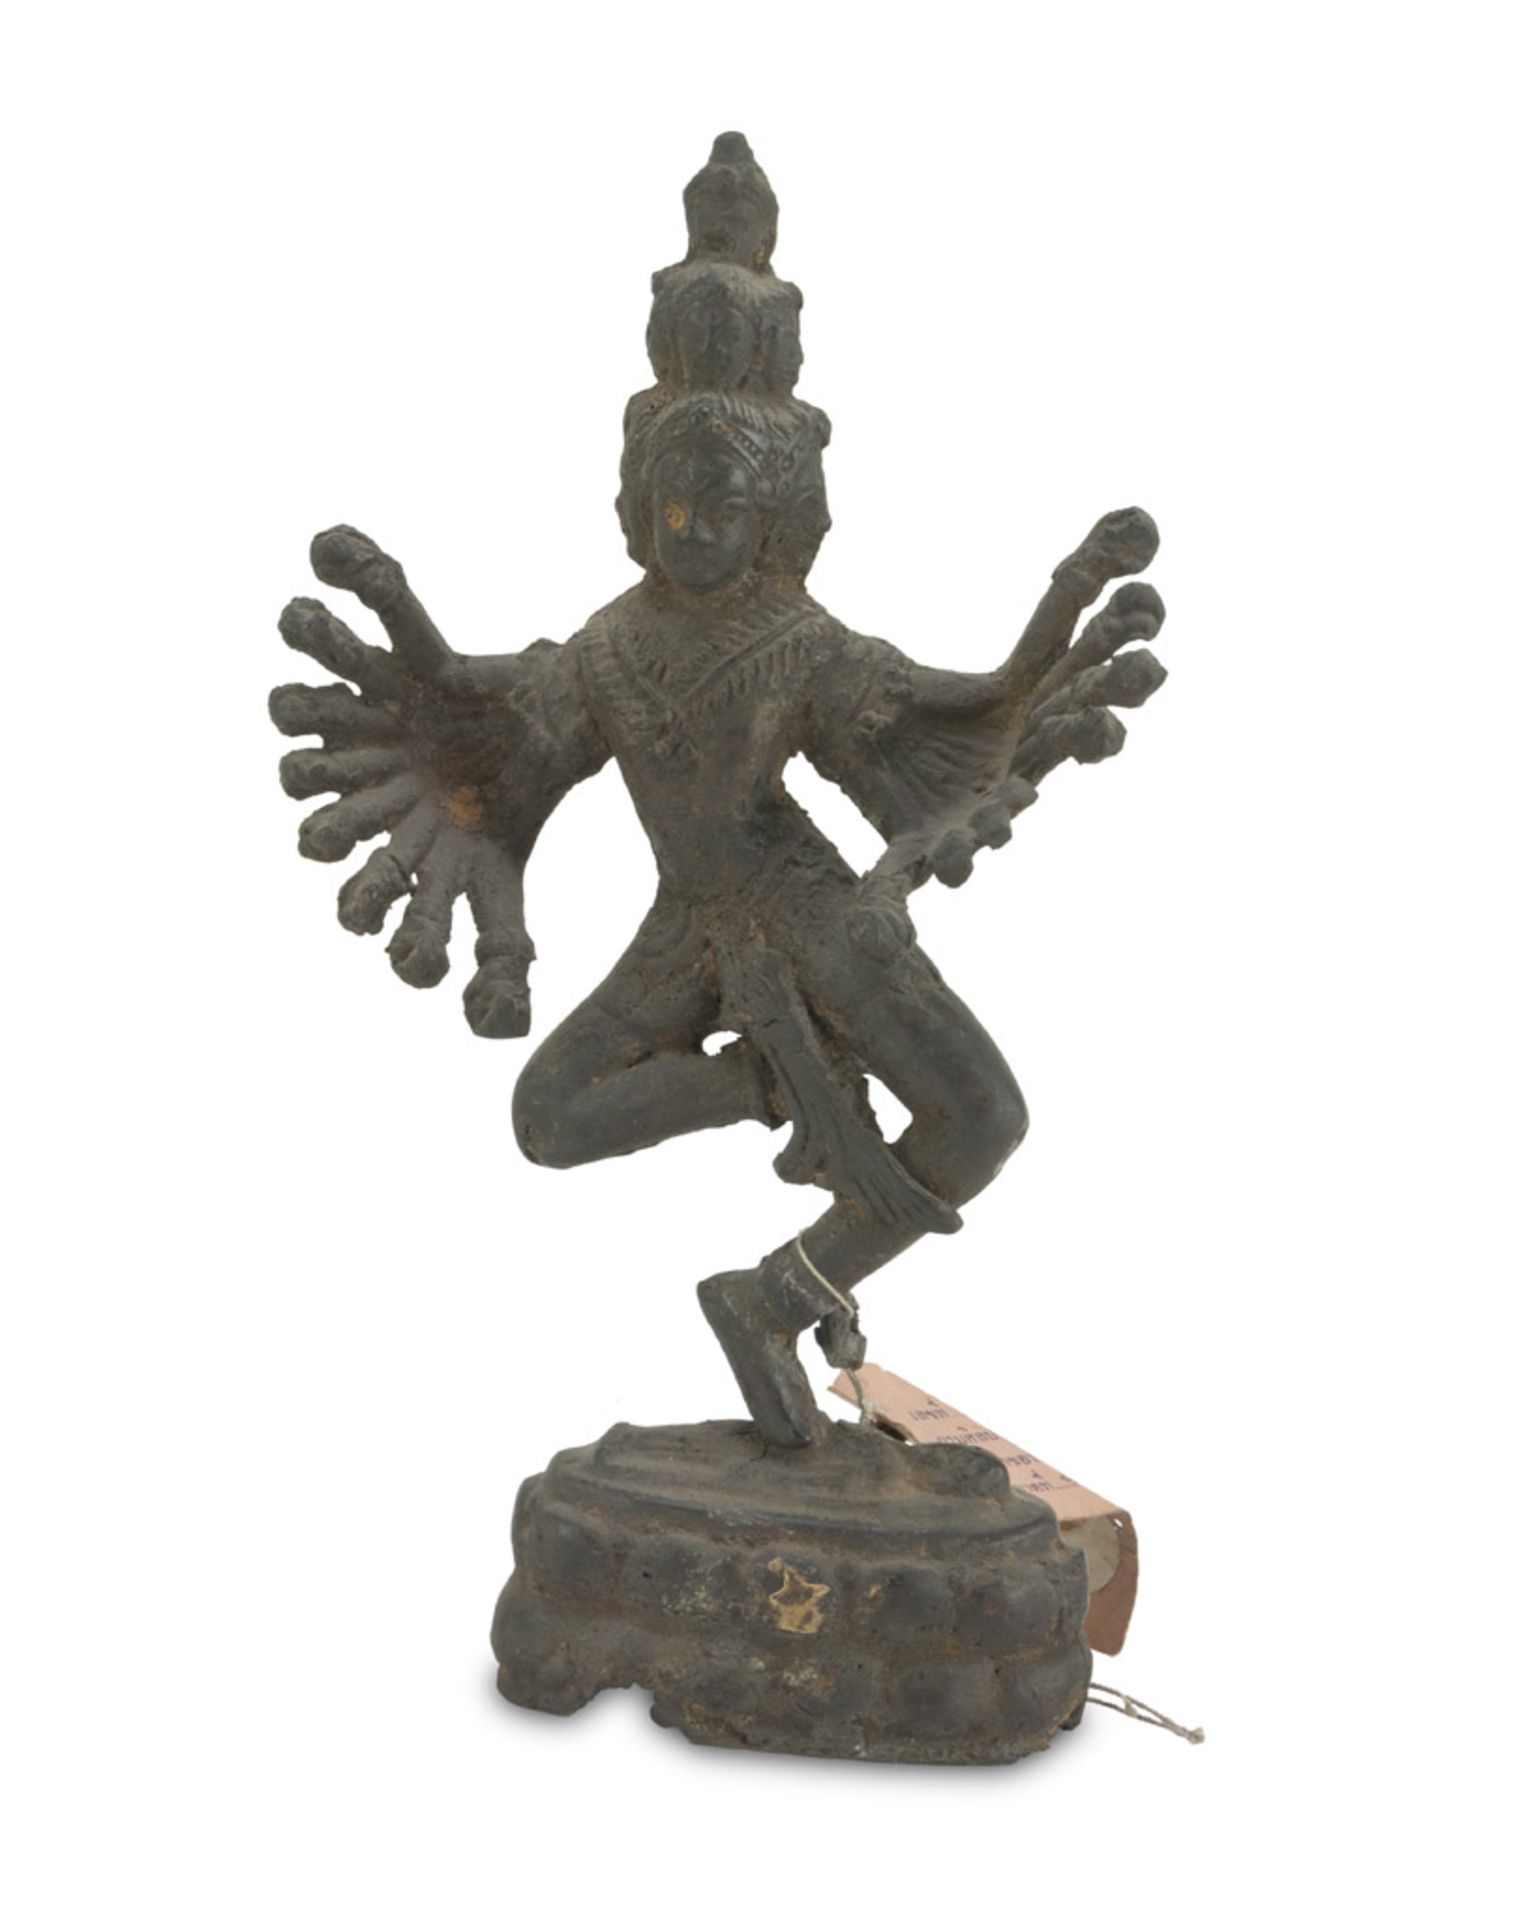 BRONZE SCULPTURE, THAILAND 19TH CENTURY representing divinity on an oval rock base. Measures cm.